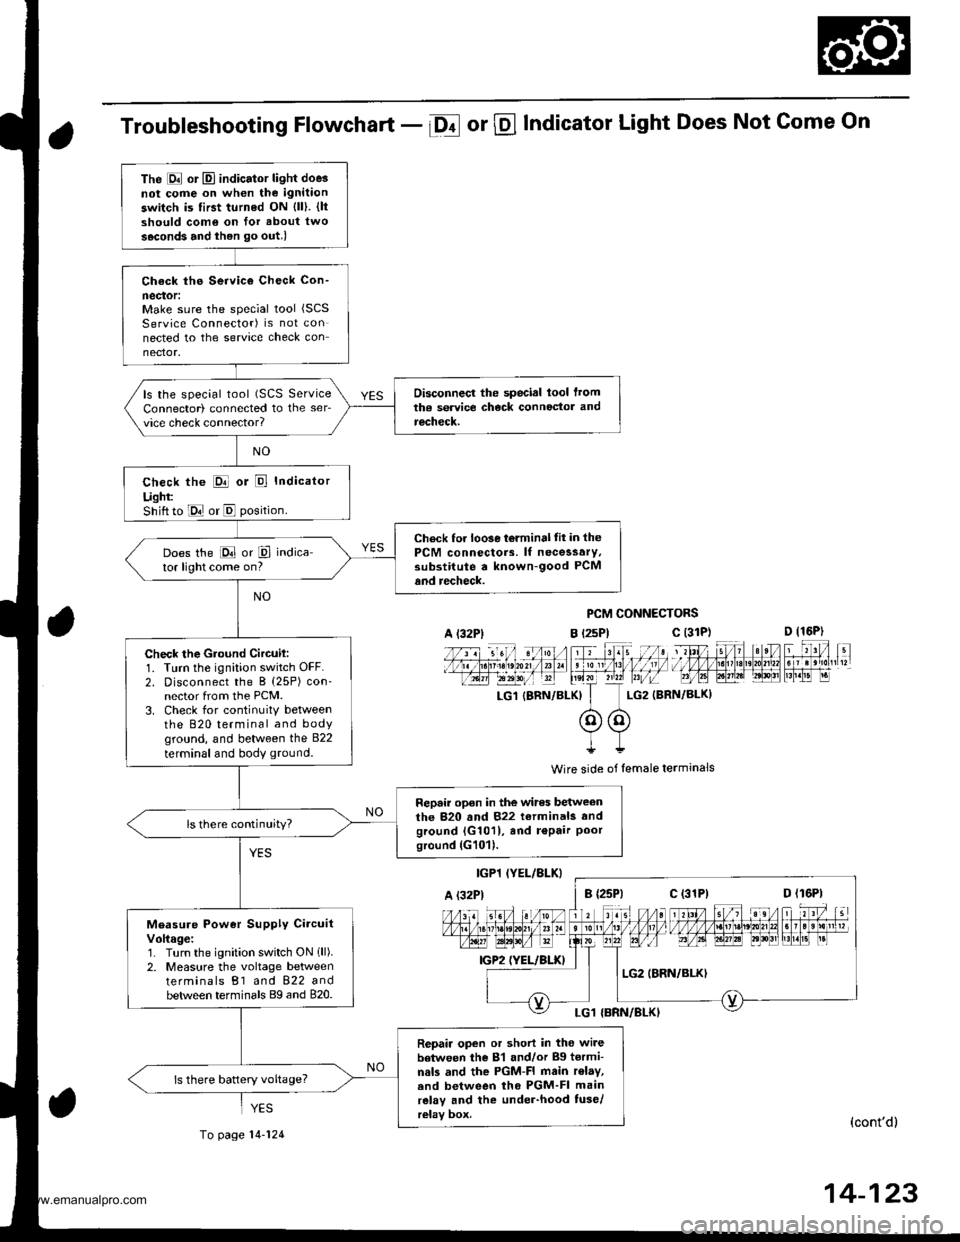 HONDA CR-V 2000 RD1-RD3 / 1.G Manual Online 
Troubleshooting Flowchart - Df or @ Indicator Light Does Not Come On
PCM CONNECTORS
B t2sPl c (31D (16P)
l*f4tr 8-
f - -- -6 3 rol ,: irr t lrpri$fe?0?r/a)1 e oI 13 11/ / l//|rrr I , ltelx ?r2? r,/i